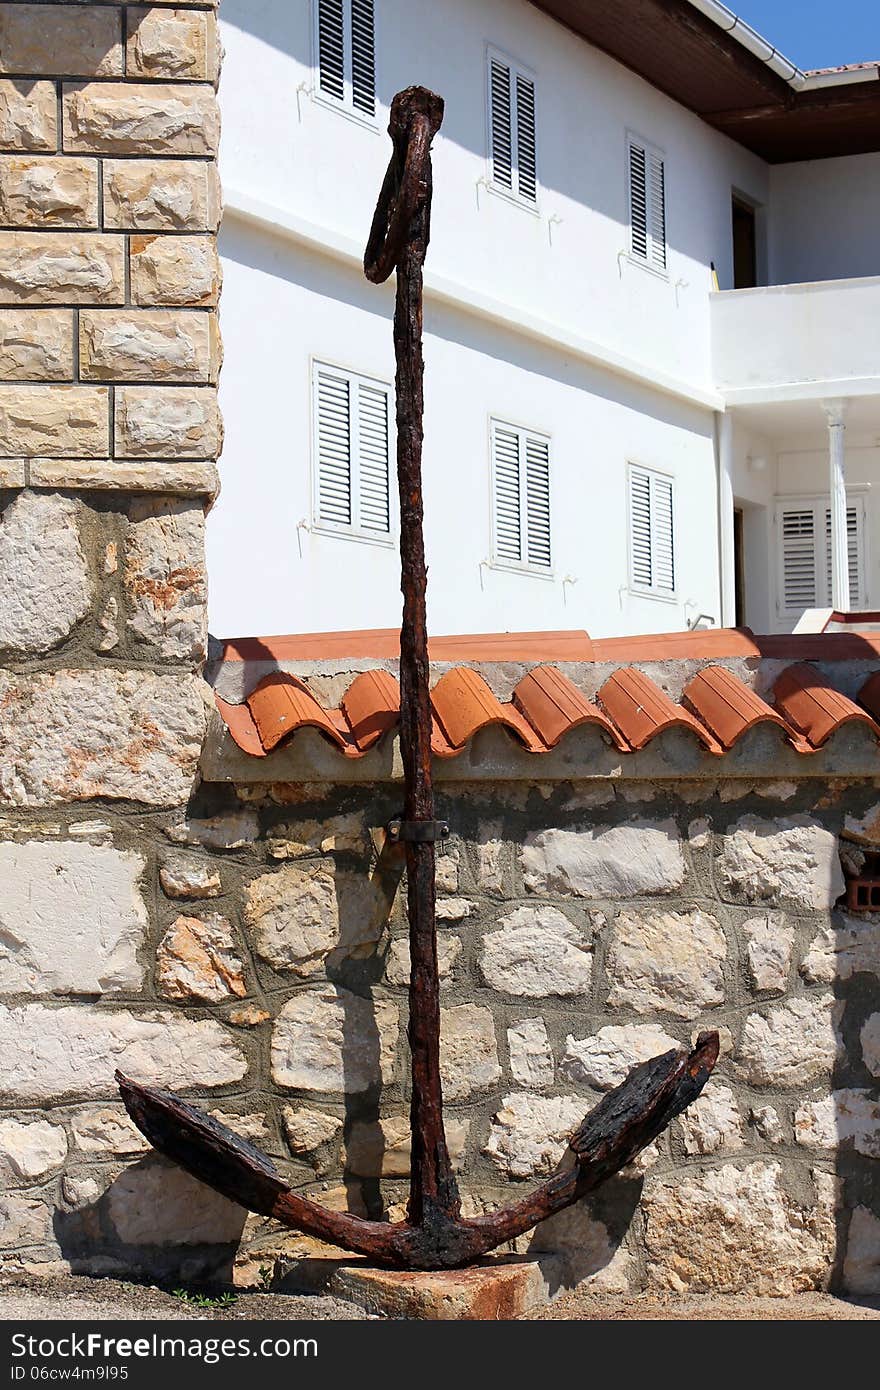 Old rusty anchor in front of a new house in Razanac, Dalmatia, Croatia. Old rusty anchor in front of a new house in Razanac, Dalmatia, Croatia